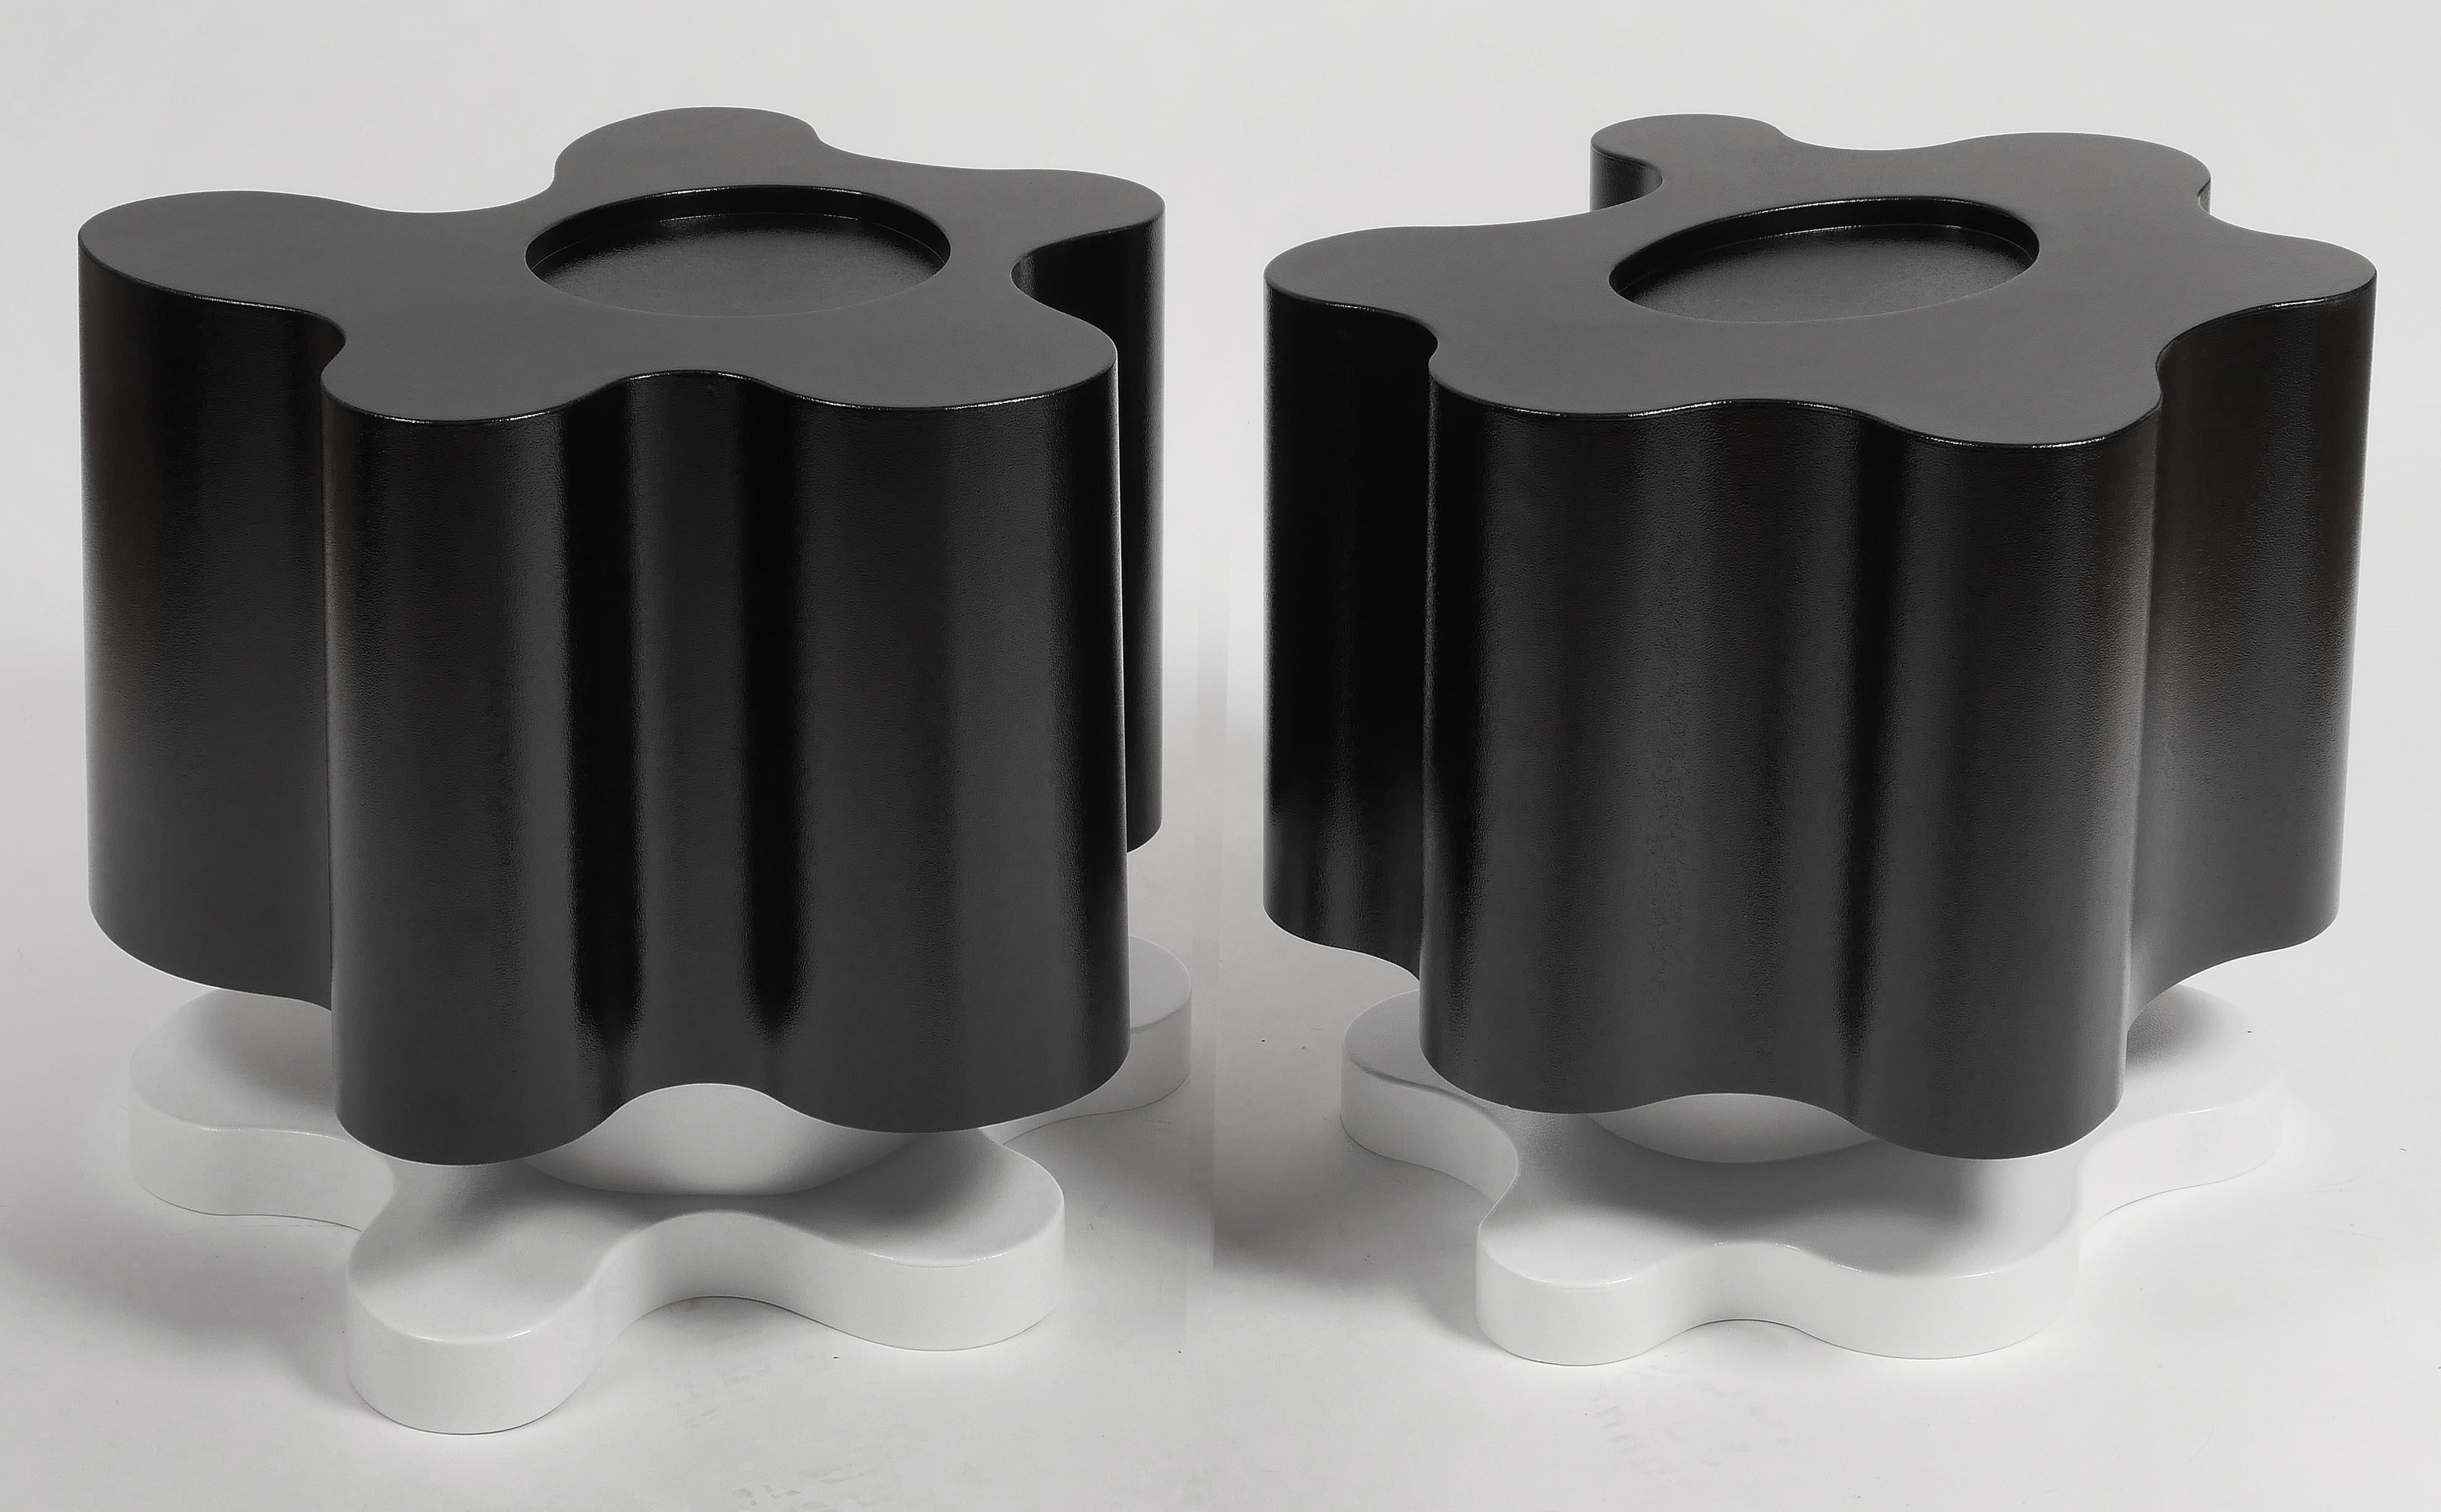 Bert Furnari Studio Abstract freeform side tables, pair

Offered for sale is a pair of Bert Furnari Studio powder-coated aluminum occasional tables with a pedestal base and a black and white monochromatic textured finish. 

Bert Furnari (b.1968)